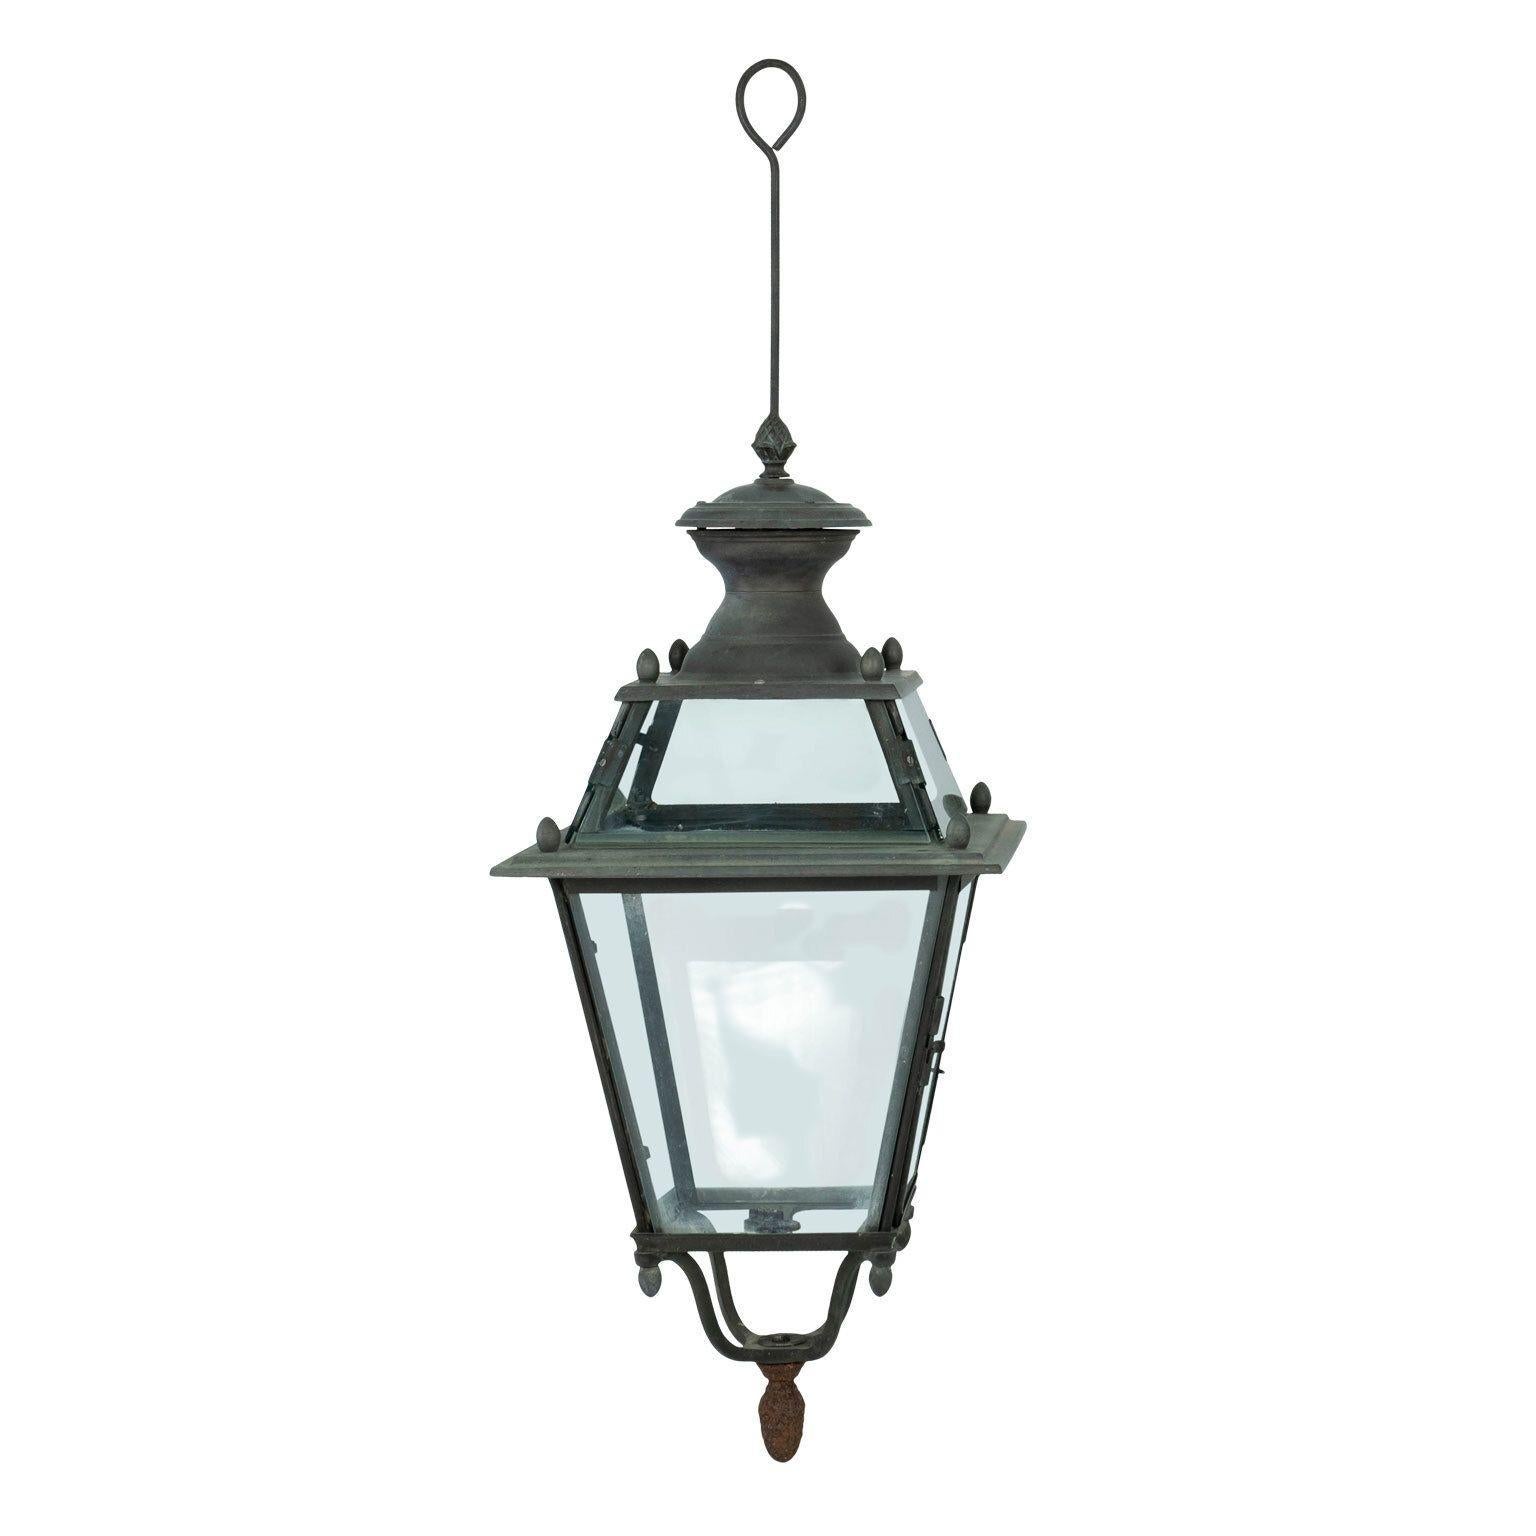 French iron and tole glass-paneled lantern circa 1870-1899. Unwired. Two lanterns are available but sold individually priced $3,800 each (see last image and item ref. 1023).

Note: Original/early finish on antique and vintage metal will include